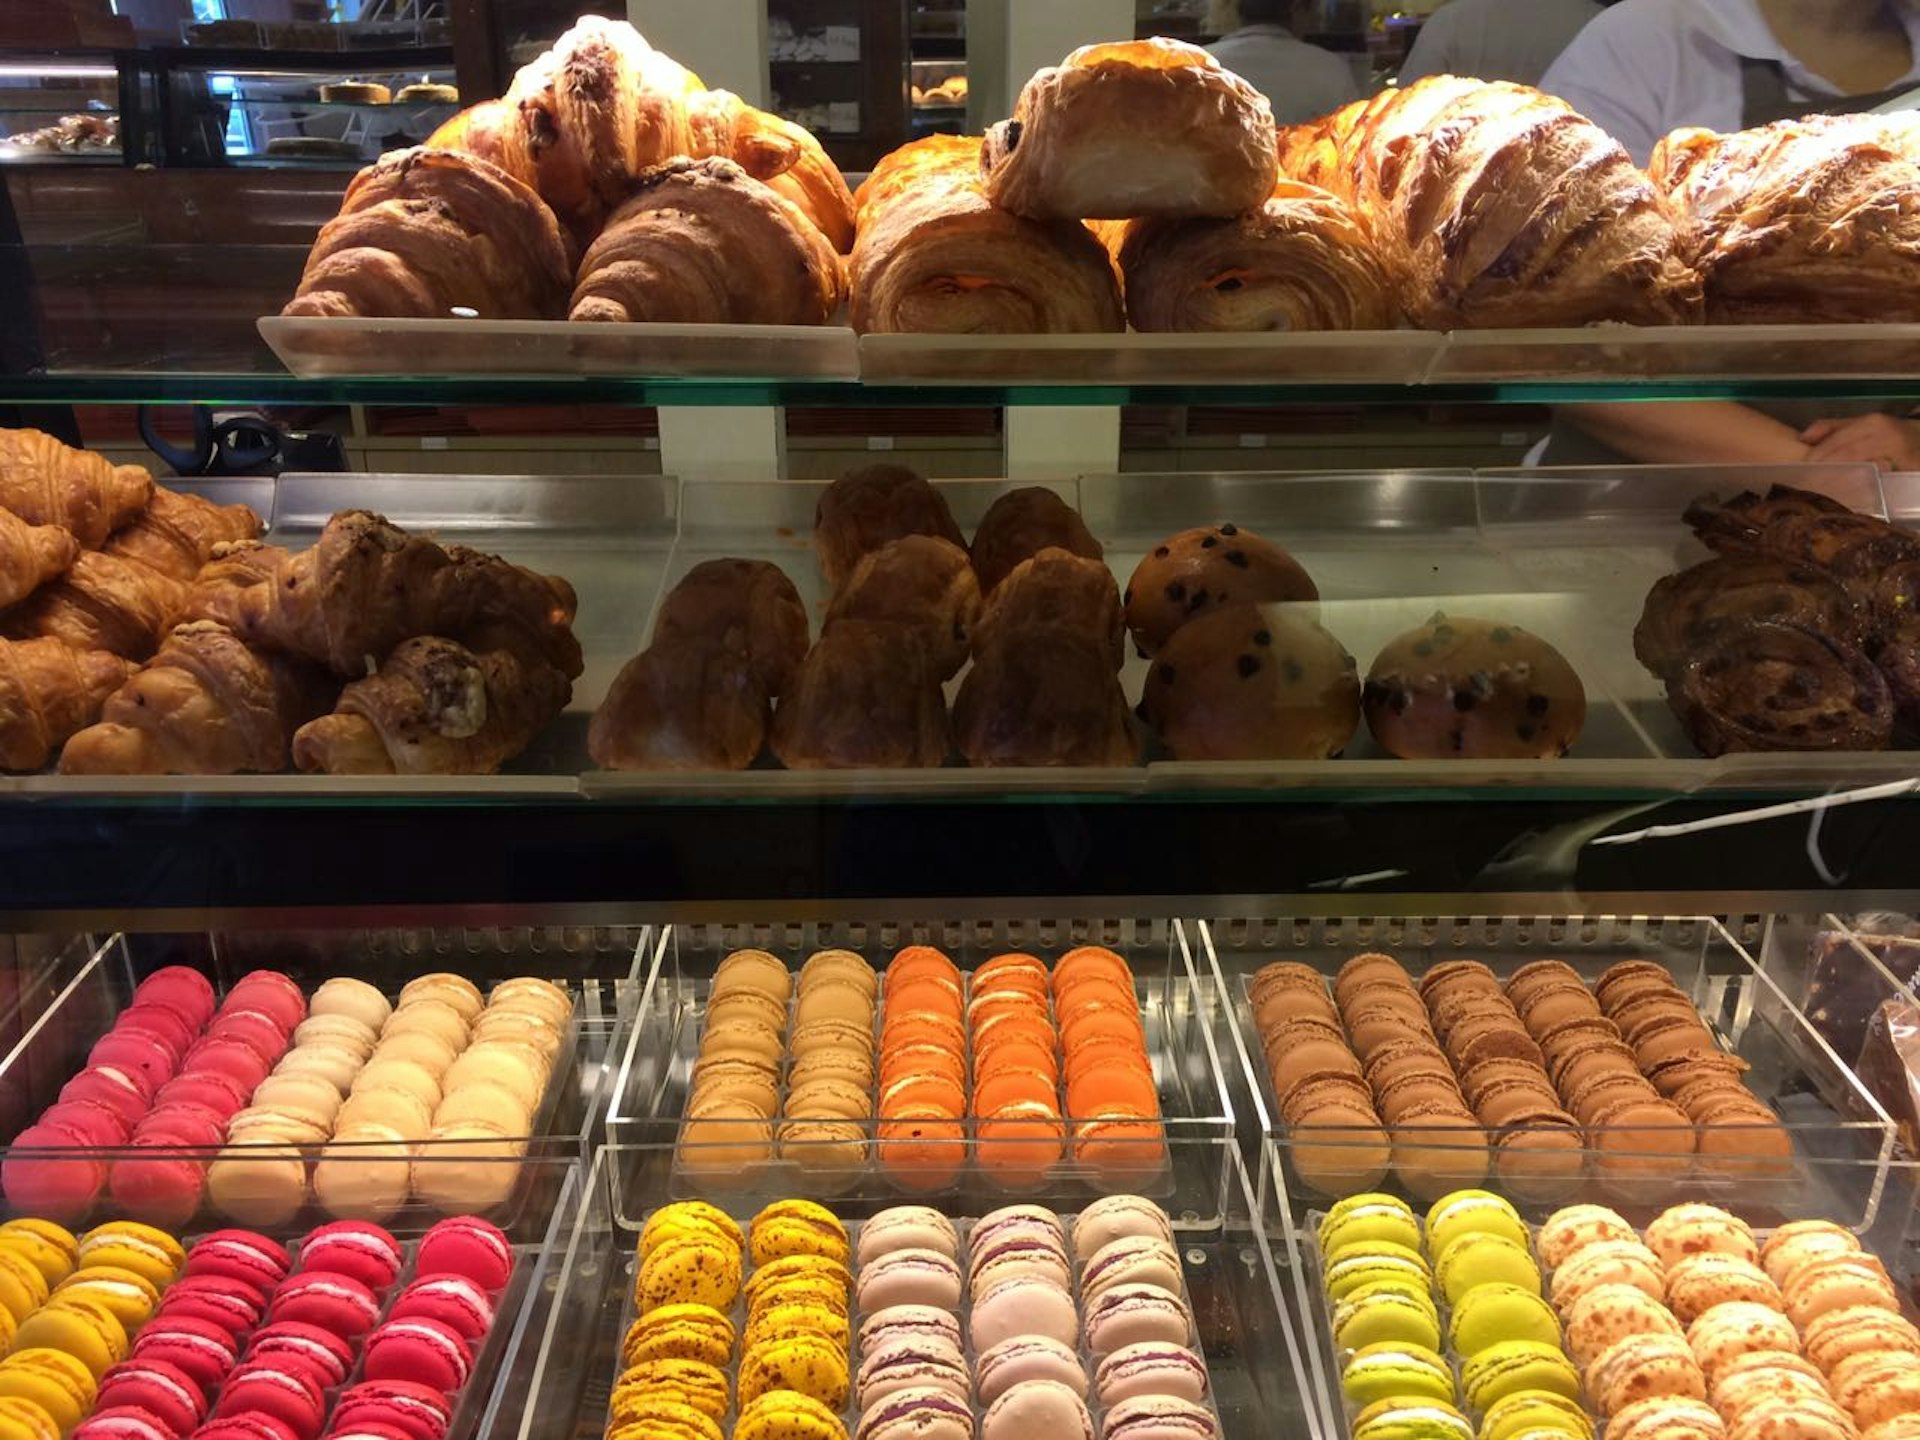 Croissants and macarons at Cannelle. Image by Stephanie d'Arc Taylor / Lonely Planet